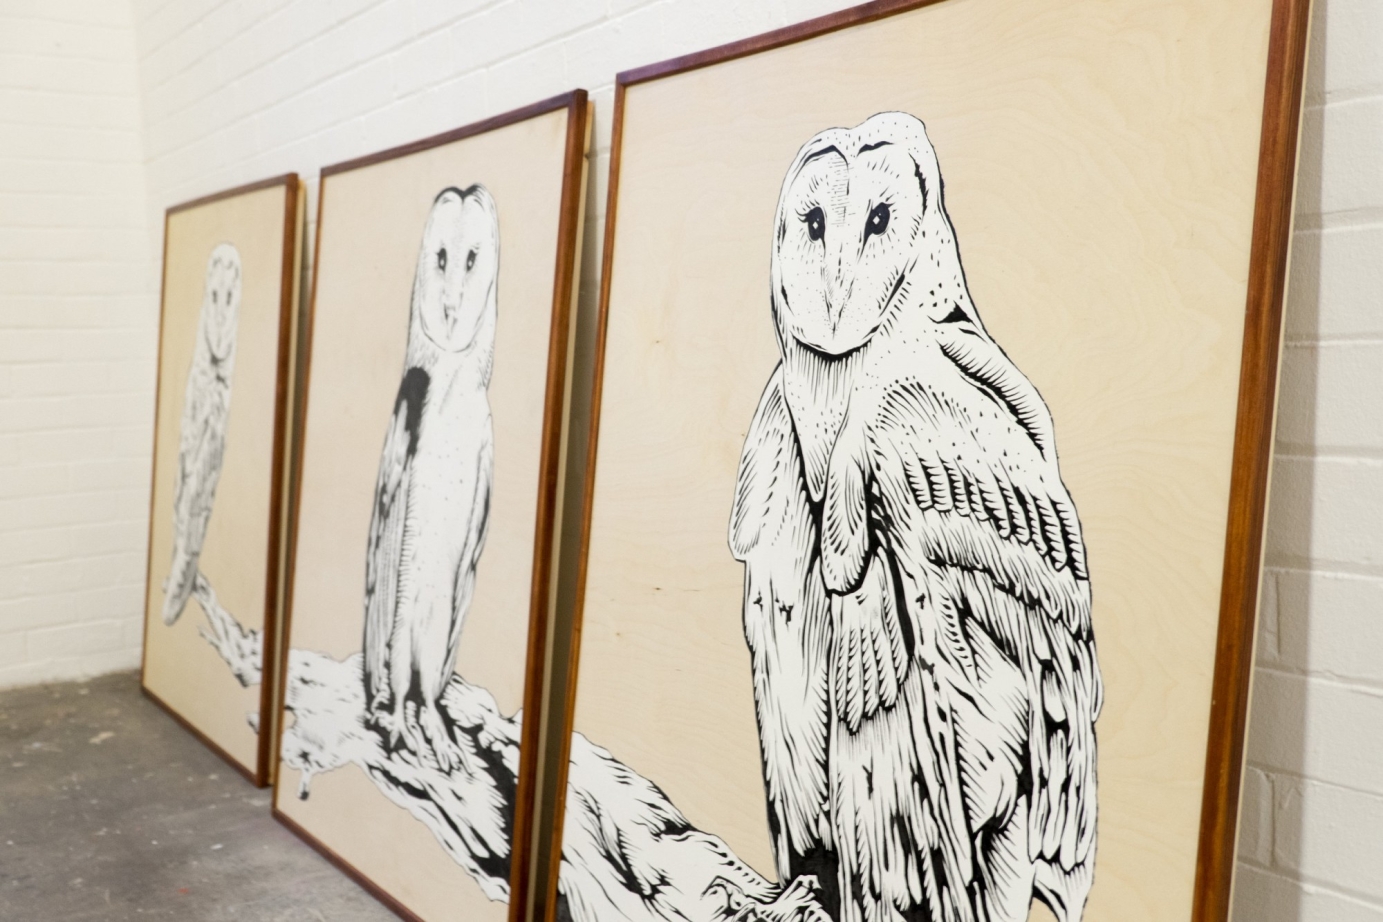 Royal Marriot Hotel Owls paintings